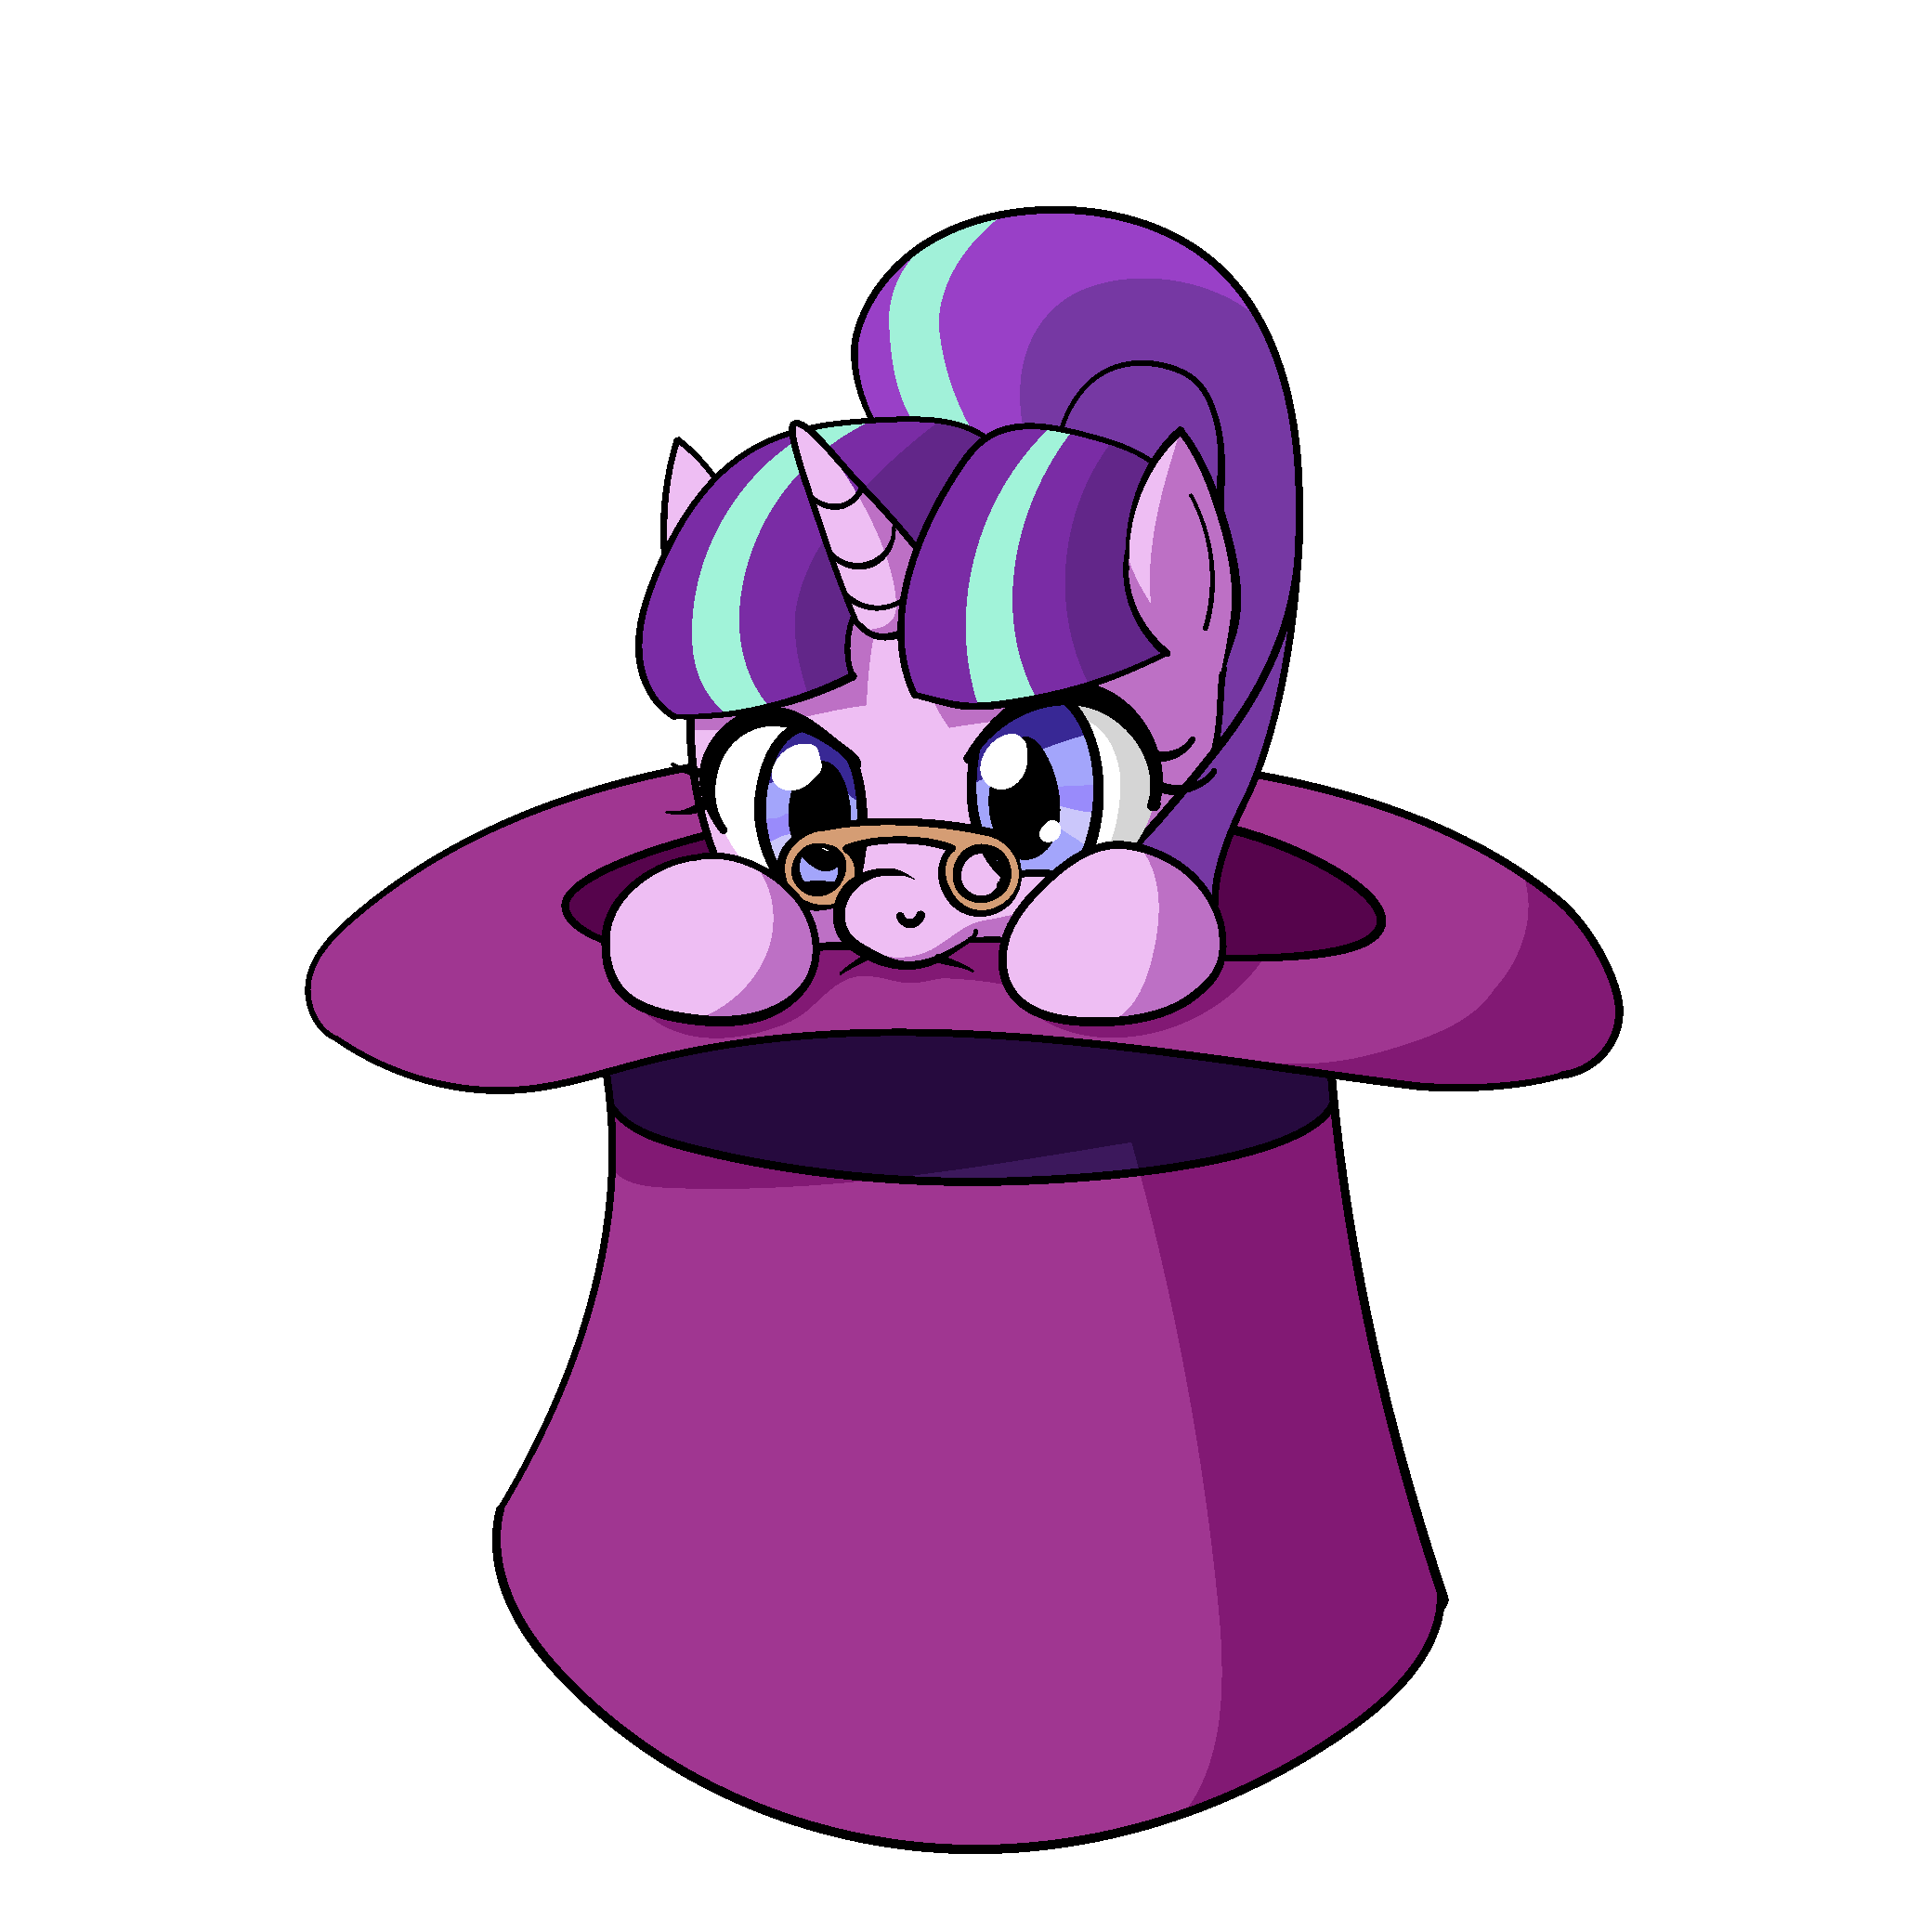 Starlight in a top hat